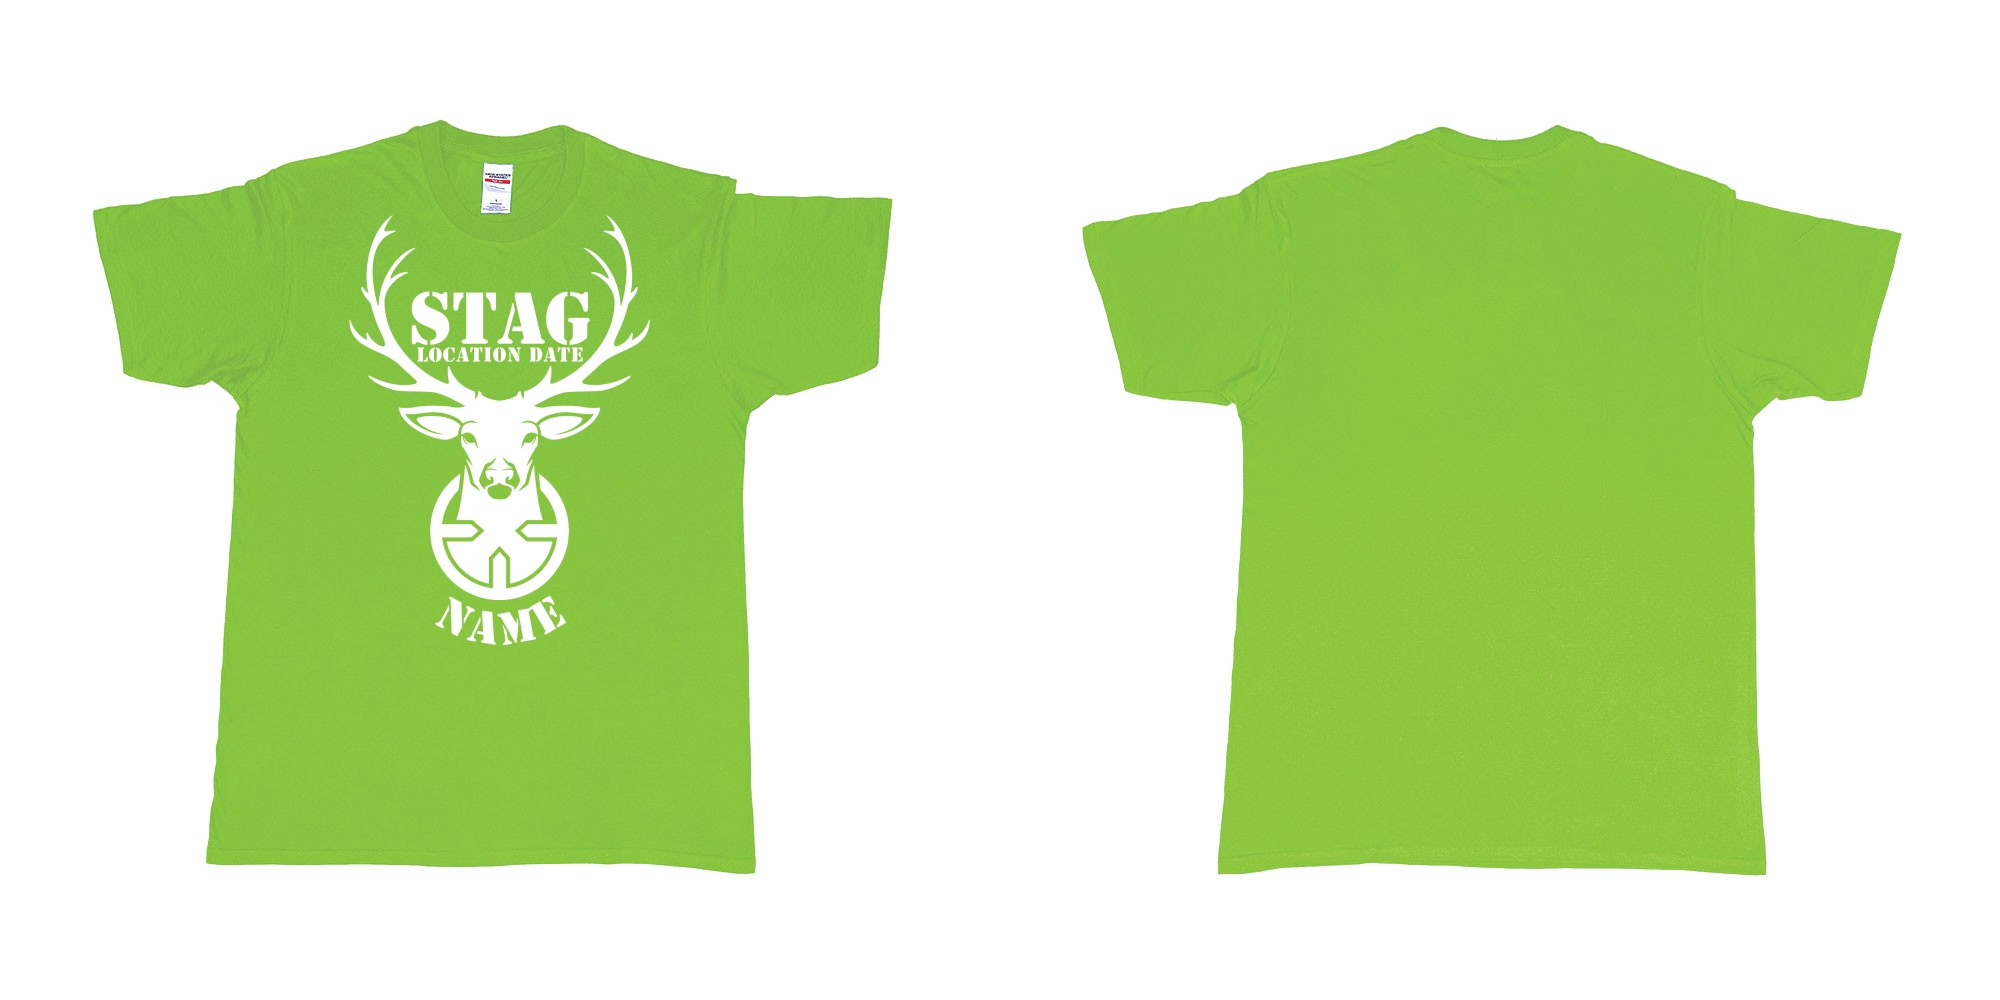 Custom tshirt design aiming for a stag custom tshirt print in fabric color lime choice your own text made in Bali by The Pirate Way